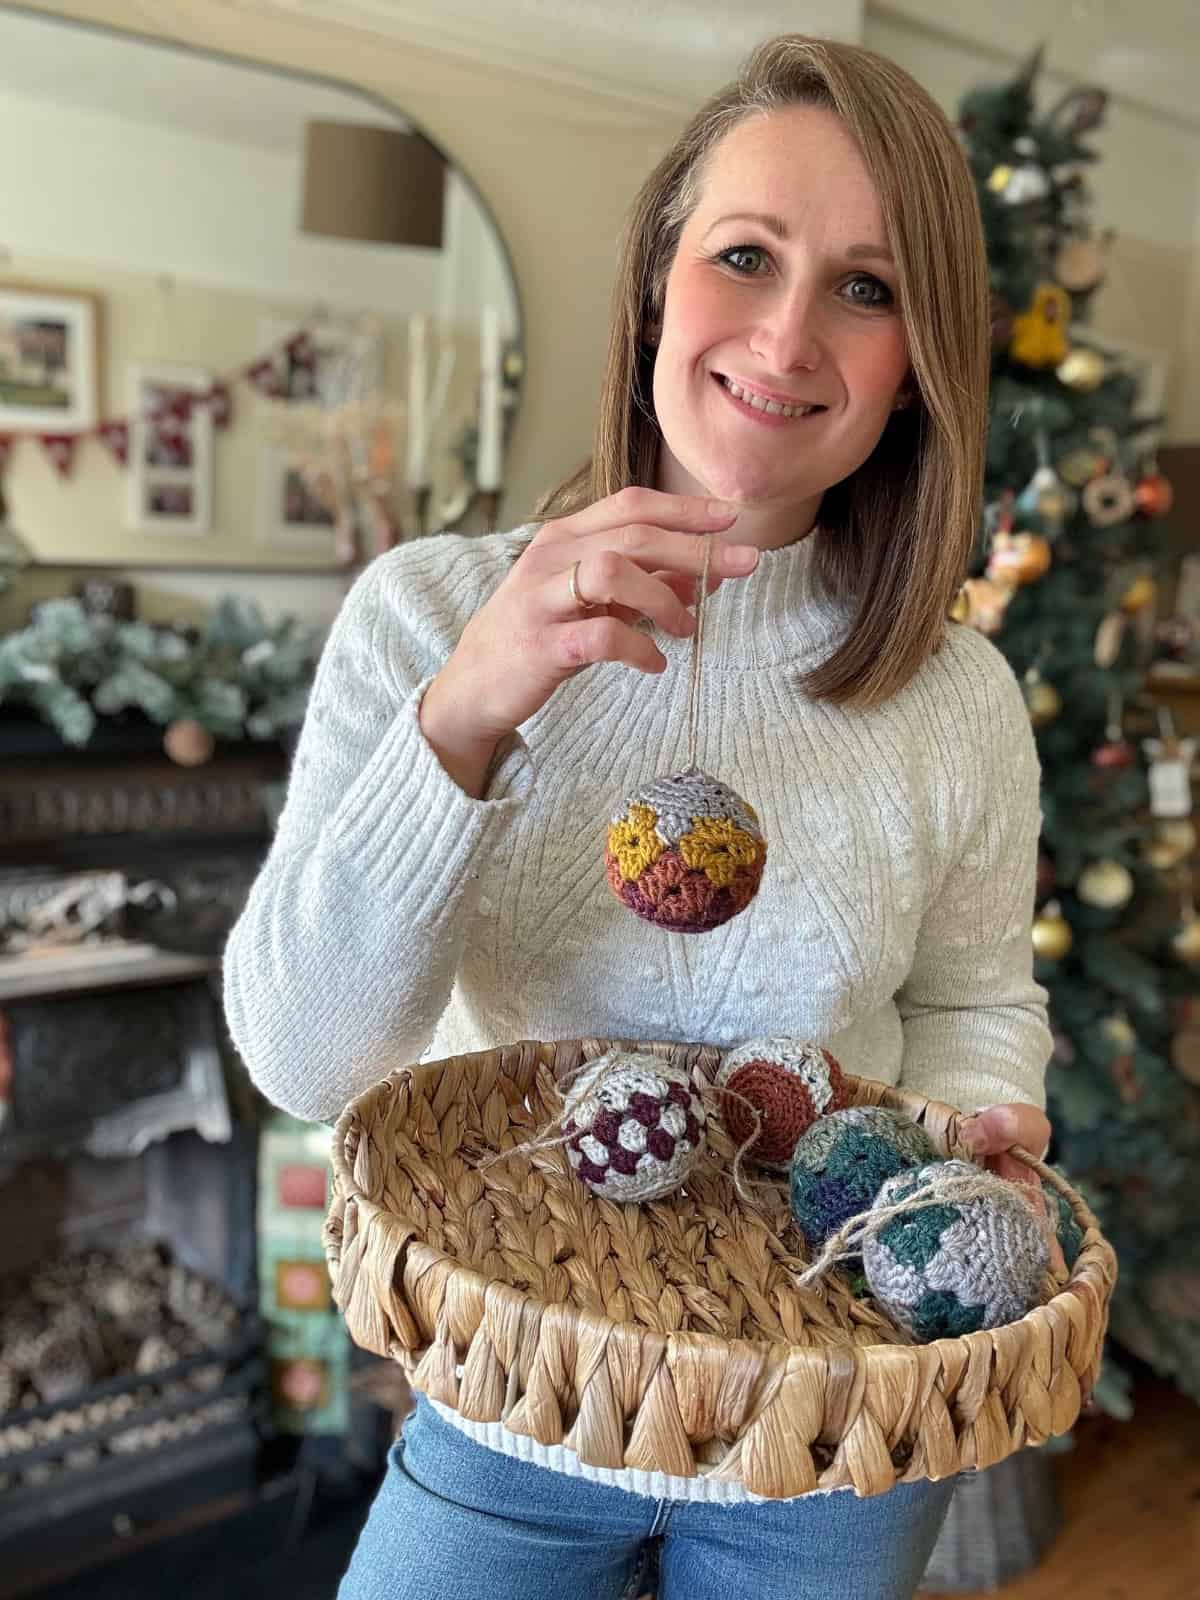 A woman holding a basket of crocheted ornaments in front of a christmas tree.